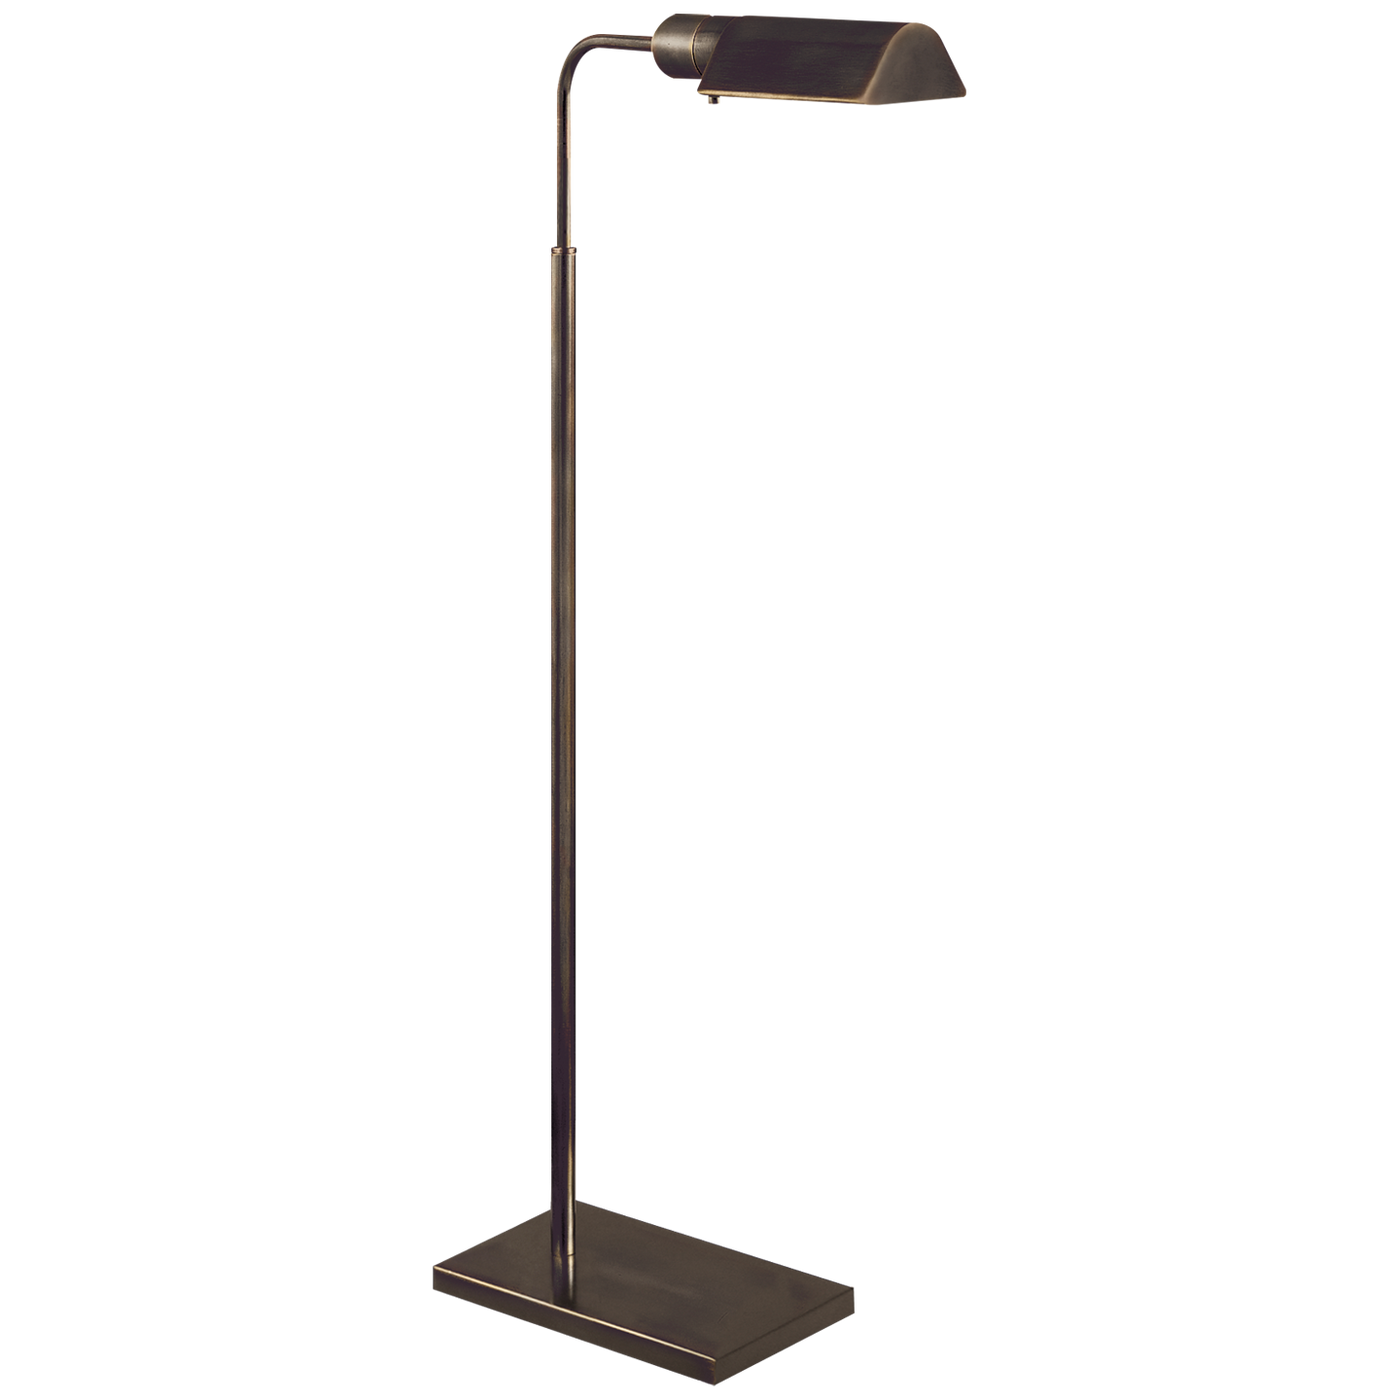 FLOOR LAMP STUDIO ADJUSTABLE (Available in 4 Finishes)